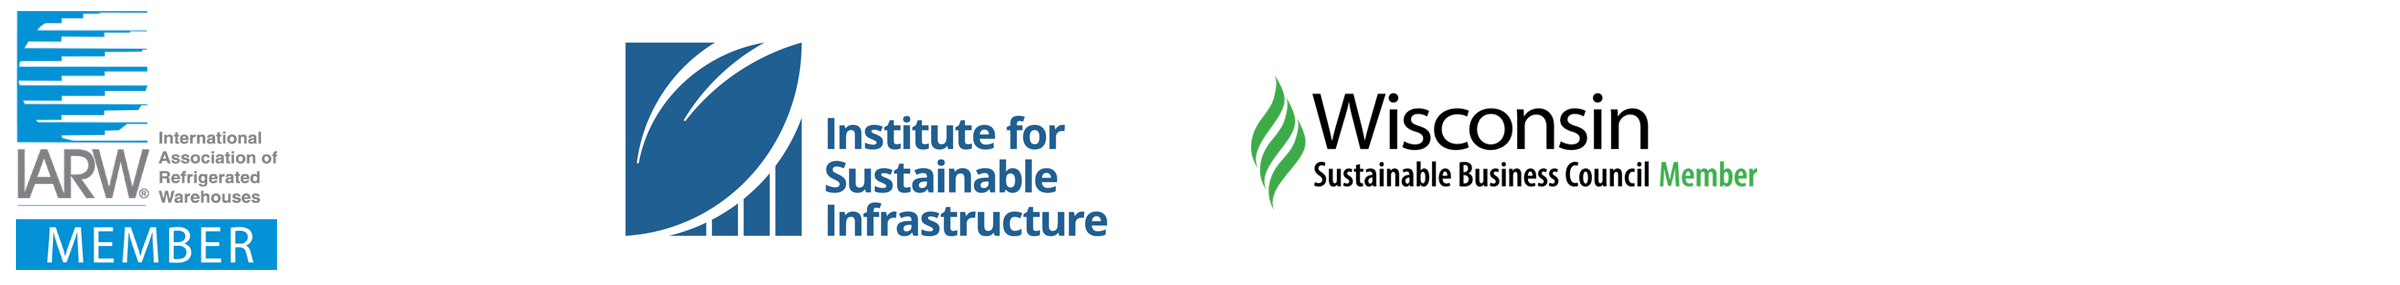 Logos of International Assoc of Refrigerated Warehouses, Institute for Sustainable Infrastructure, and the Wisconsin Sustainable Business Council